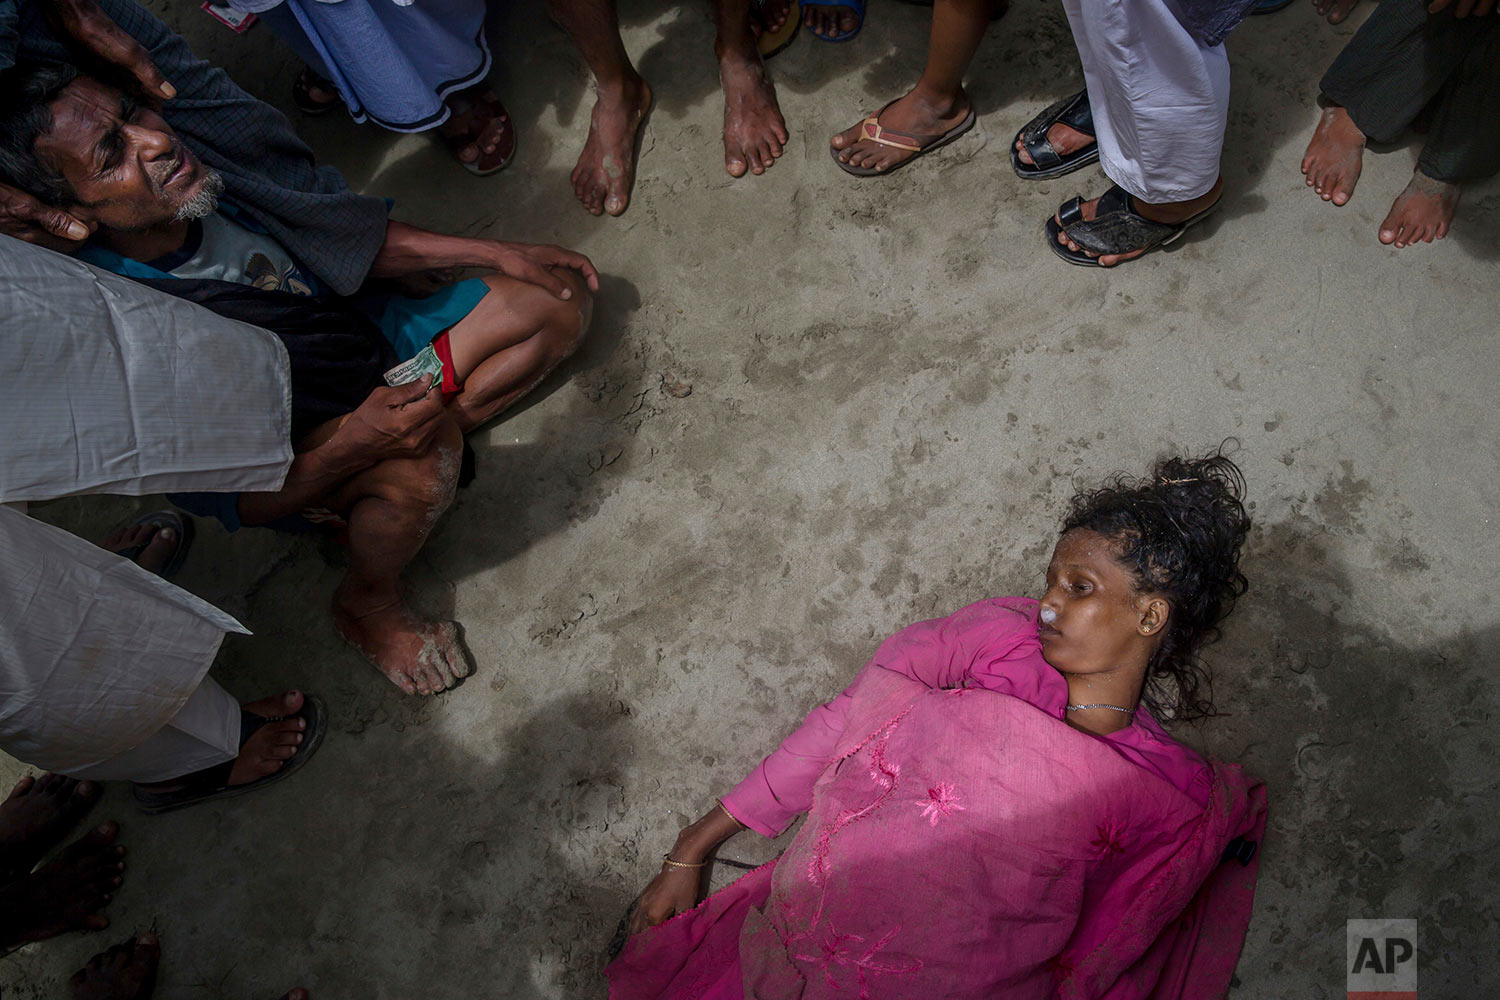 A Rohingya Muslim man Mohammad Islam sits beside the body of his daughter-in-law Anwara Begum who died when the boat they were traveling in capsized minutes before reaching shore in Shah Porir Dwip, Bangladesh, Thursday, Sept. 14, 2017. (AP Photo/Dar Yasin)